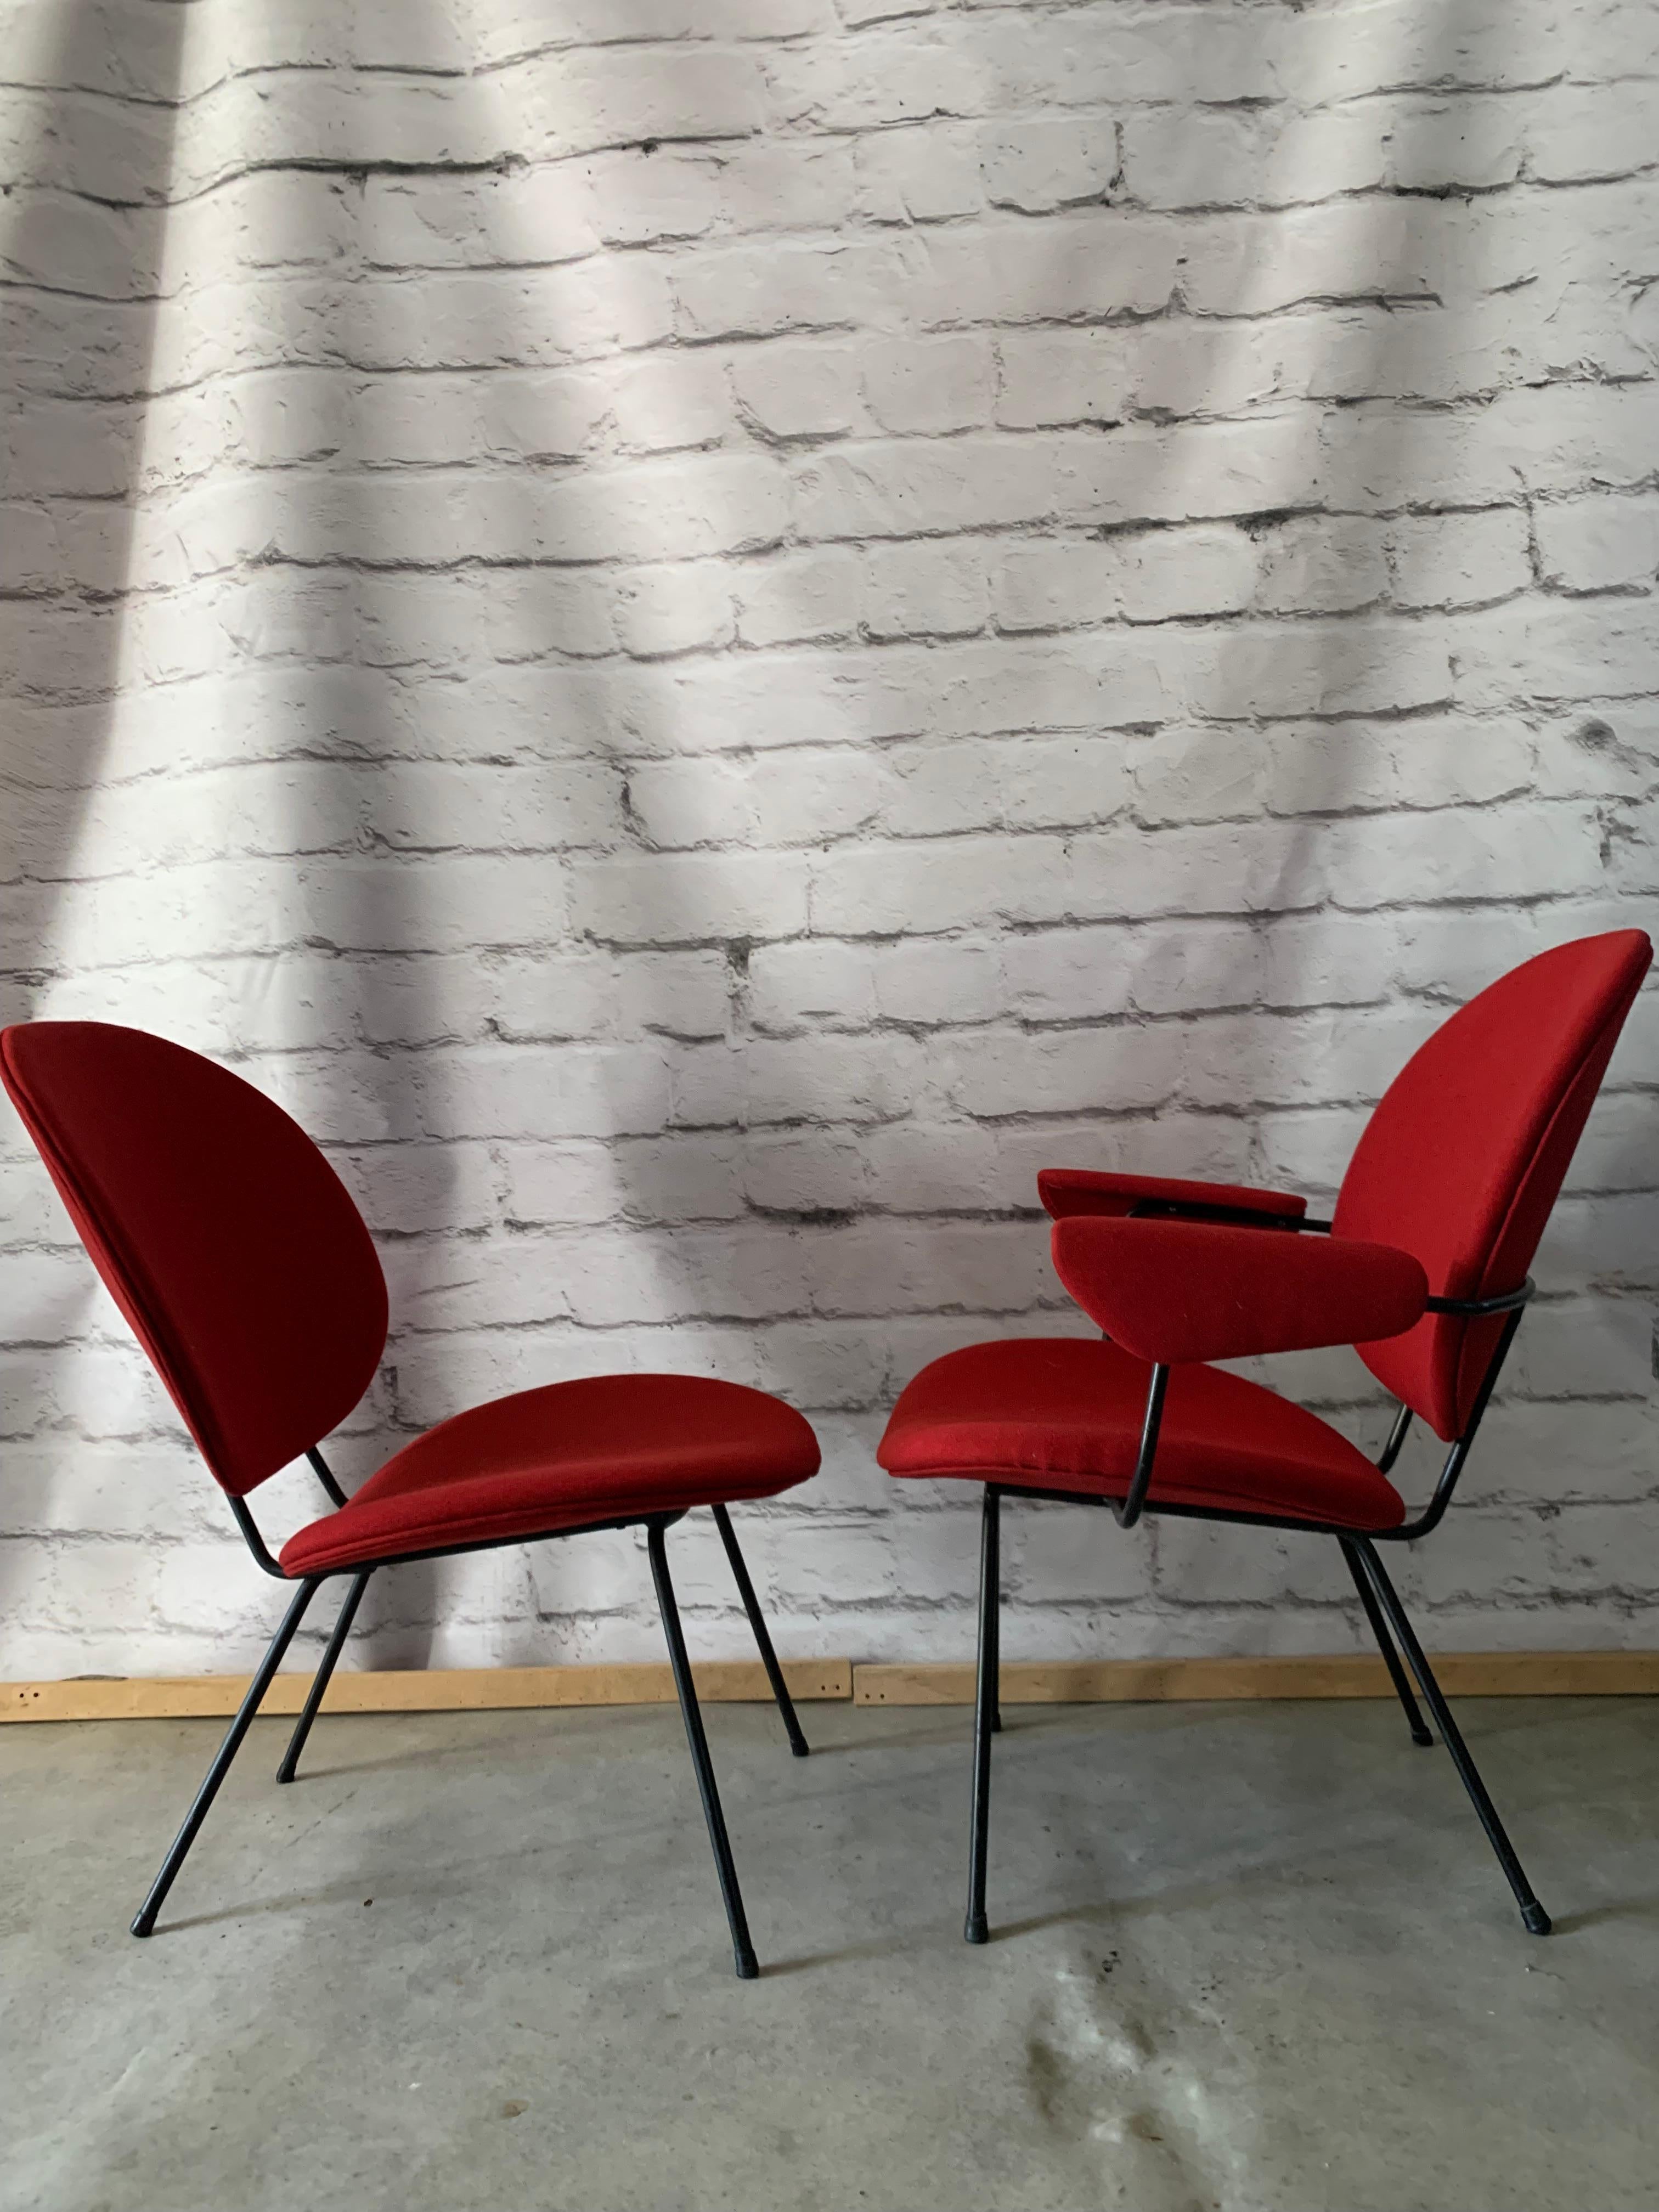 Metal Two Chairs Designed By W.H.Gispen For The Dutch Company Kembo